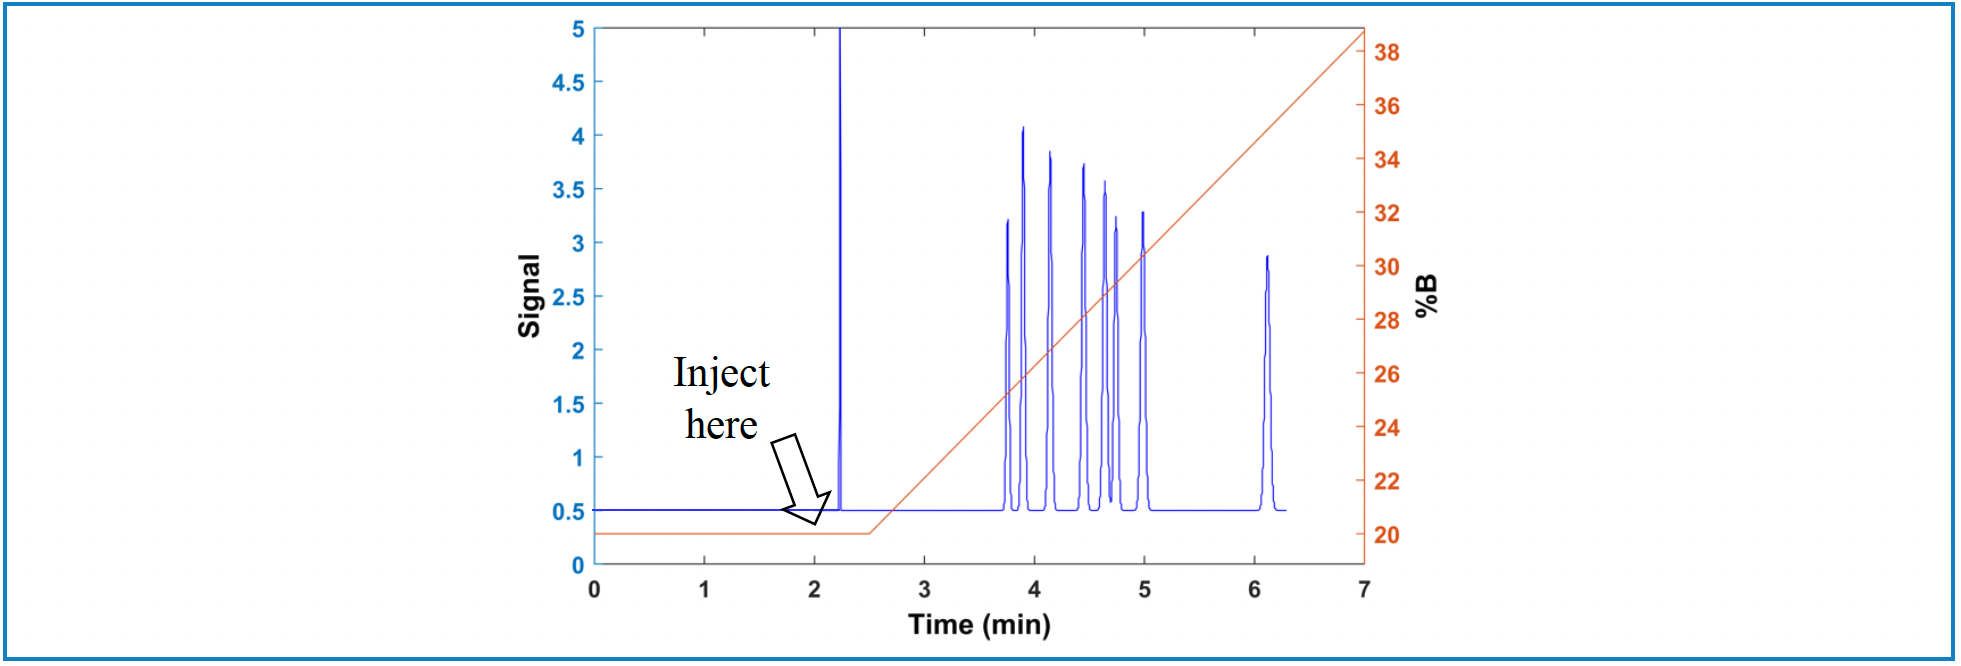 FIGURE 4: Simulated chromatogram for a system with GDV of 1000 μL, but with a delayed injection such that the effective GDV is 200 μL. Other conditions are the same as in Figure 1a.